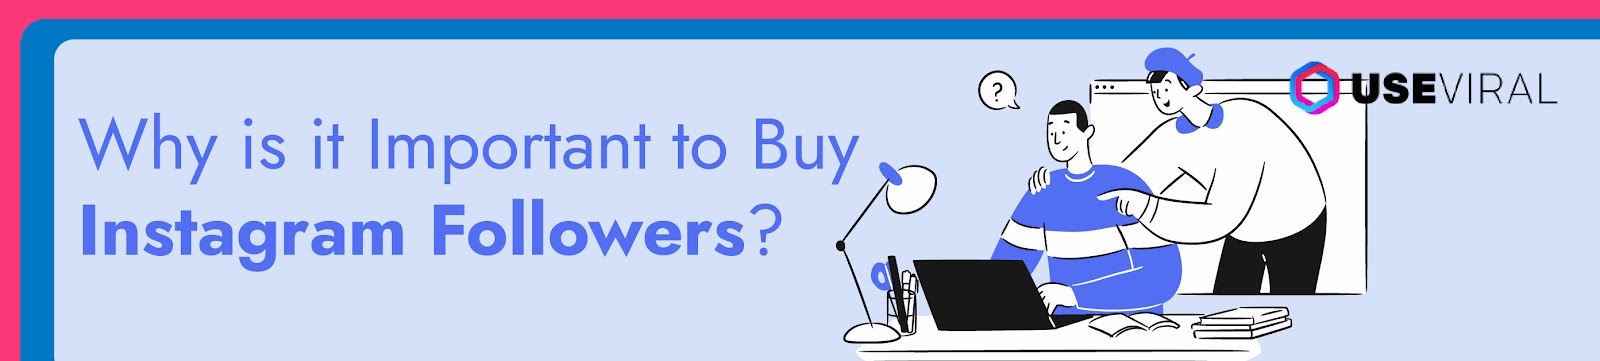 Why is it Important to Buy Instagram Followers?